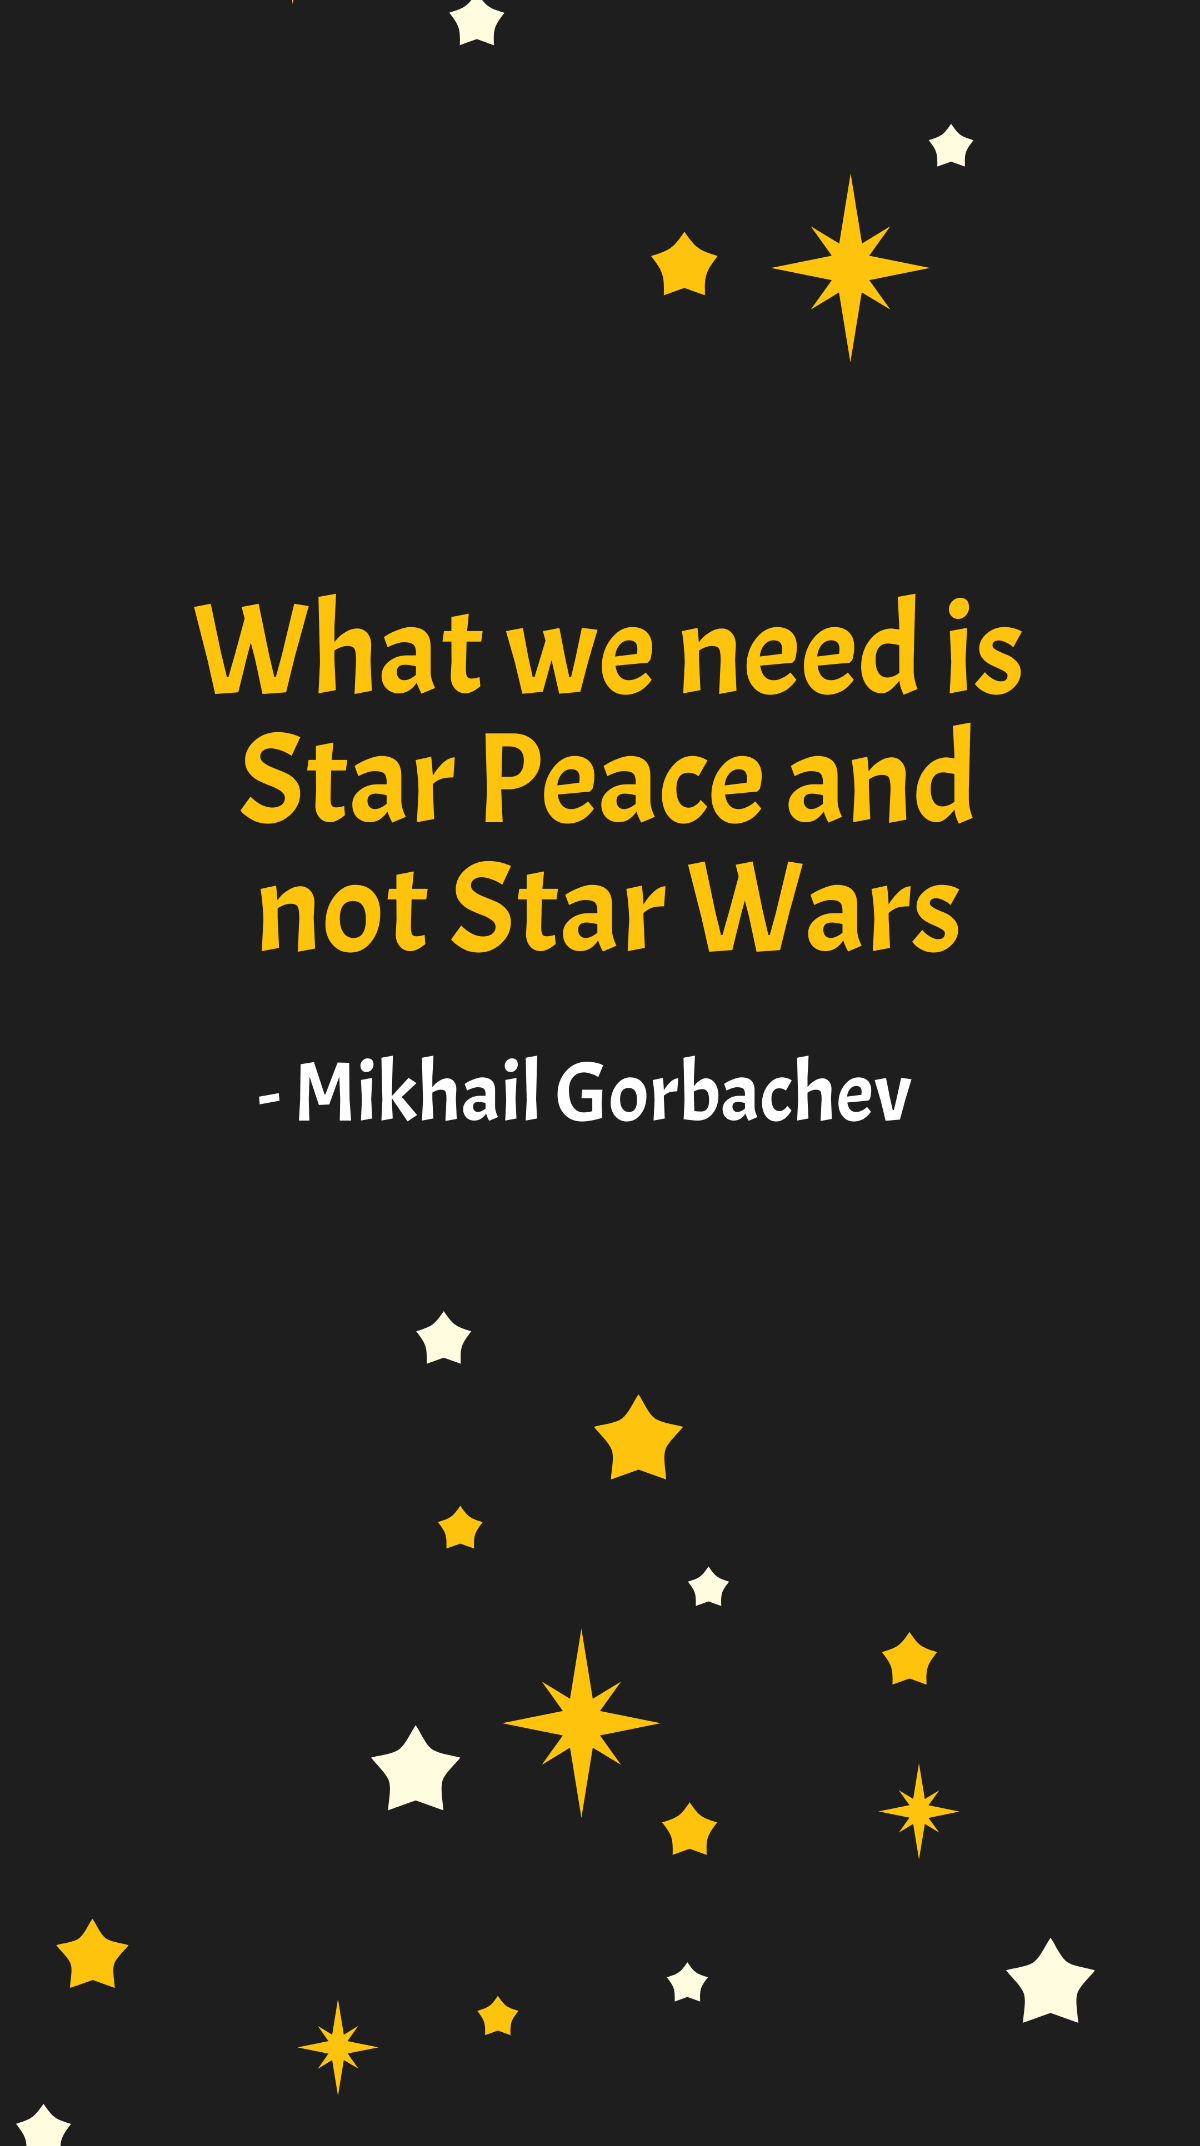 Mikhail Gorbachev - What we need is Star Peace and not Star Wars Template